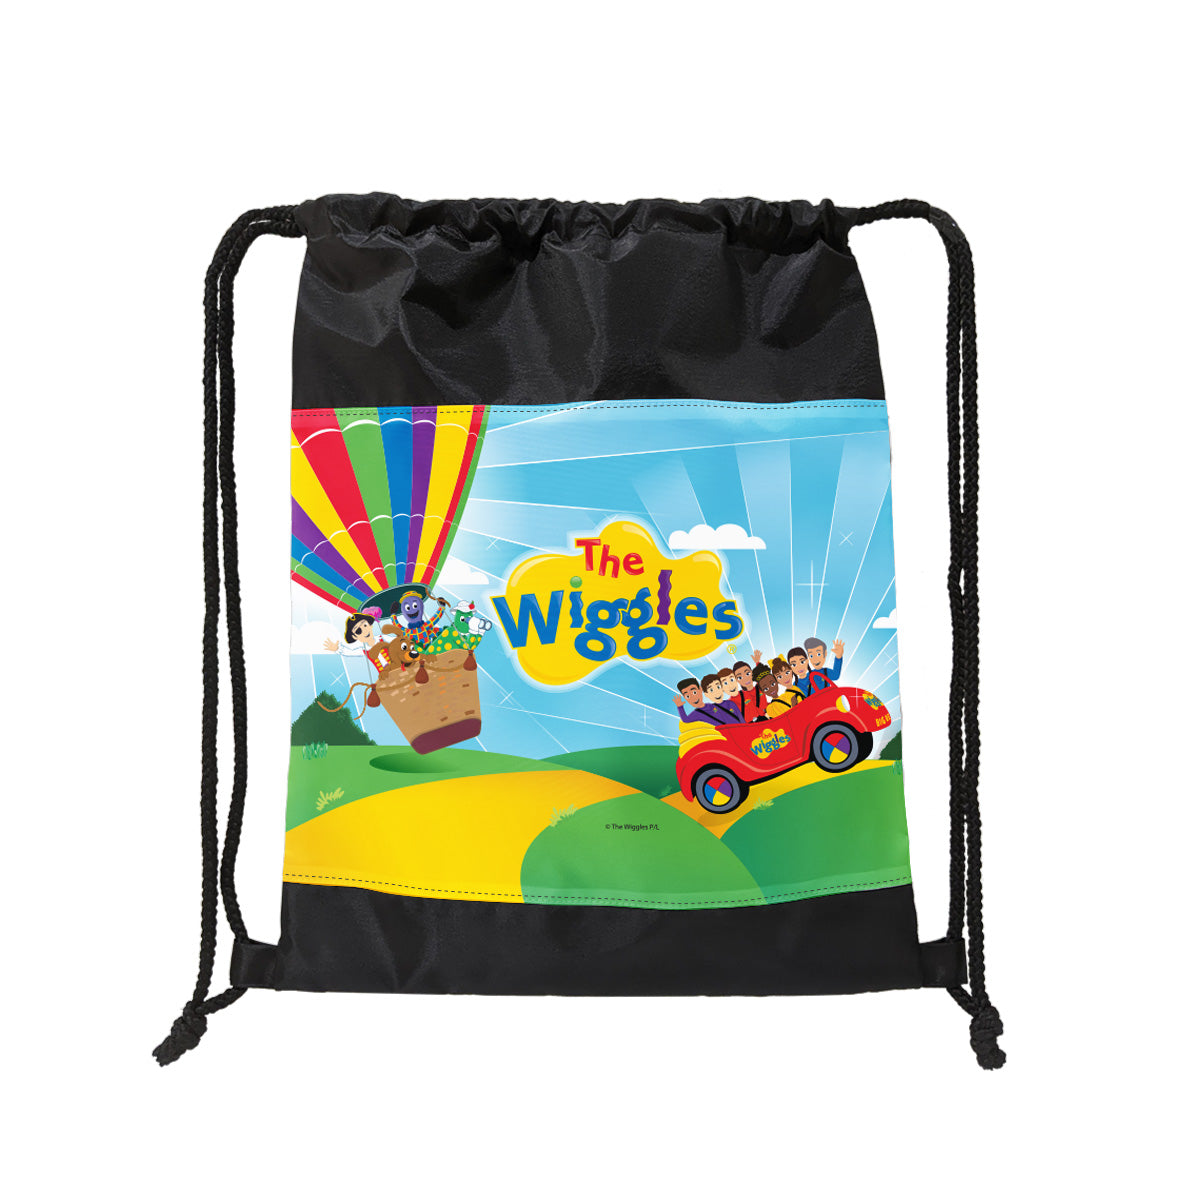 The Wiggles Travelling Drawstring Bag